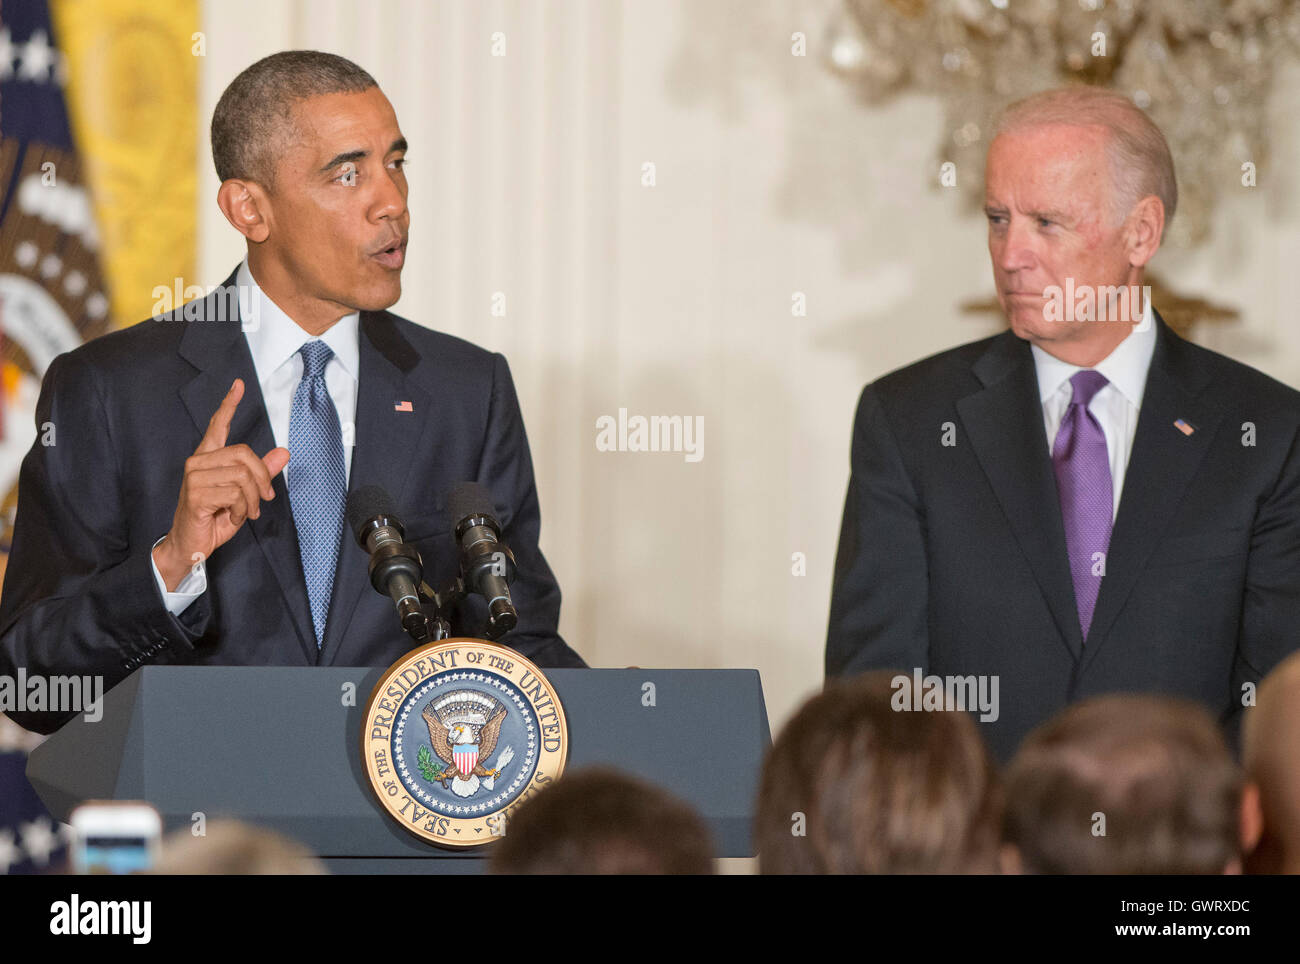 United States President Barack Obama makes remarks as US Vice President Joe Biden looks on from right, at a reception for the 25th Anniversary of the White House Initiative on Educational Excellence for Hispanics in the East Room of the White House in Was Stock Photo